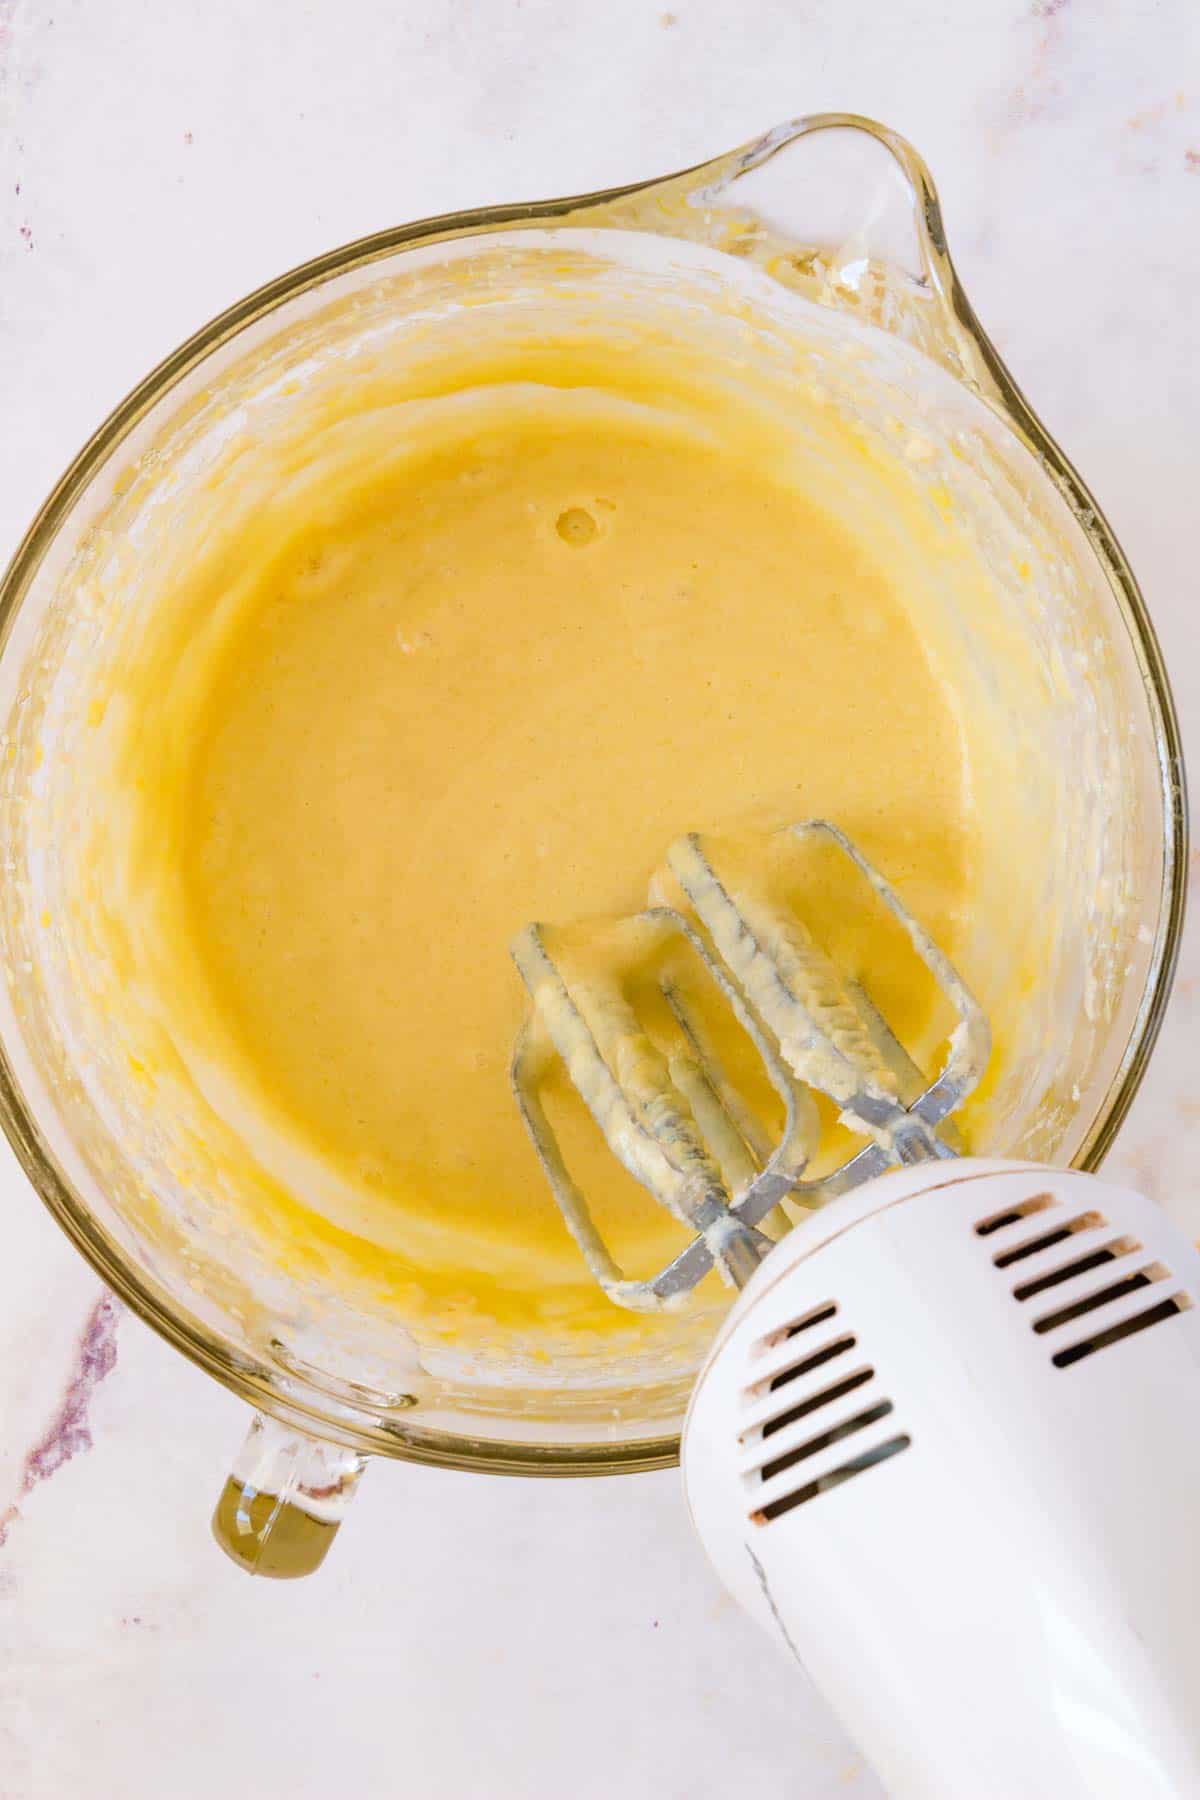 A handheld mixer is used to combine the wet ingredients for cake batter in a mixing bowl.